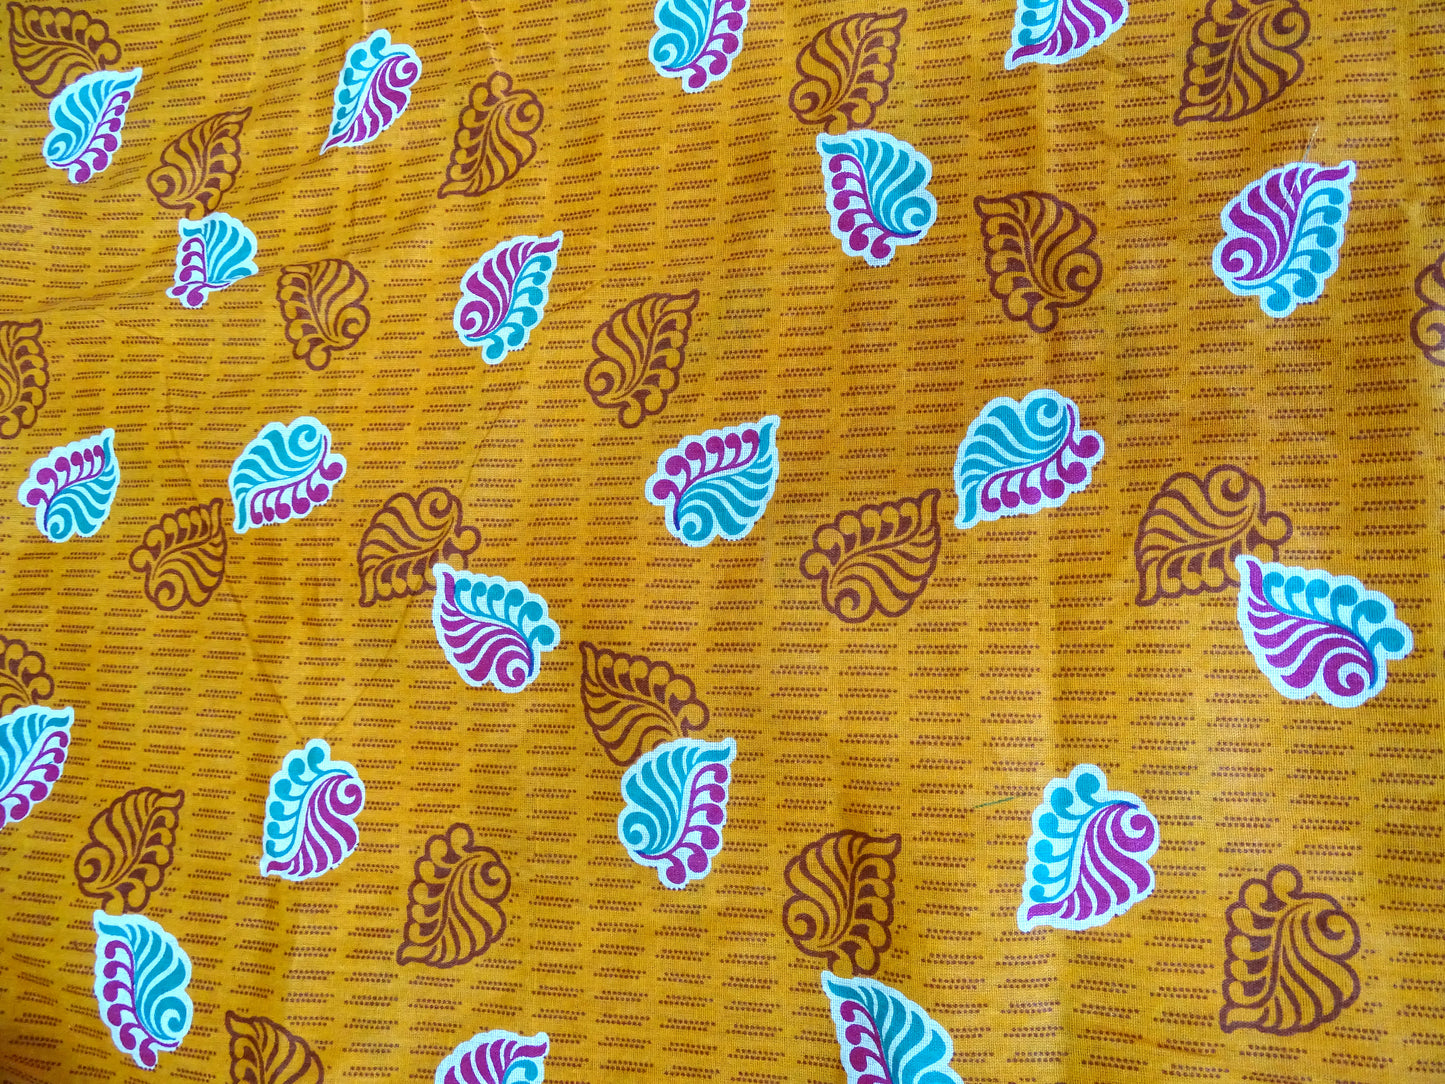 Nighty for Women Cotton Printed, Free Size, Yellow Colour Print (Pack of 1)